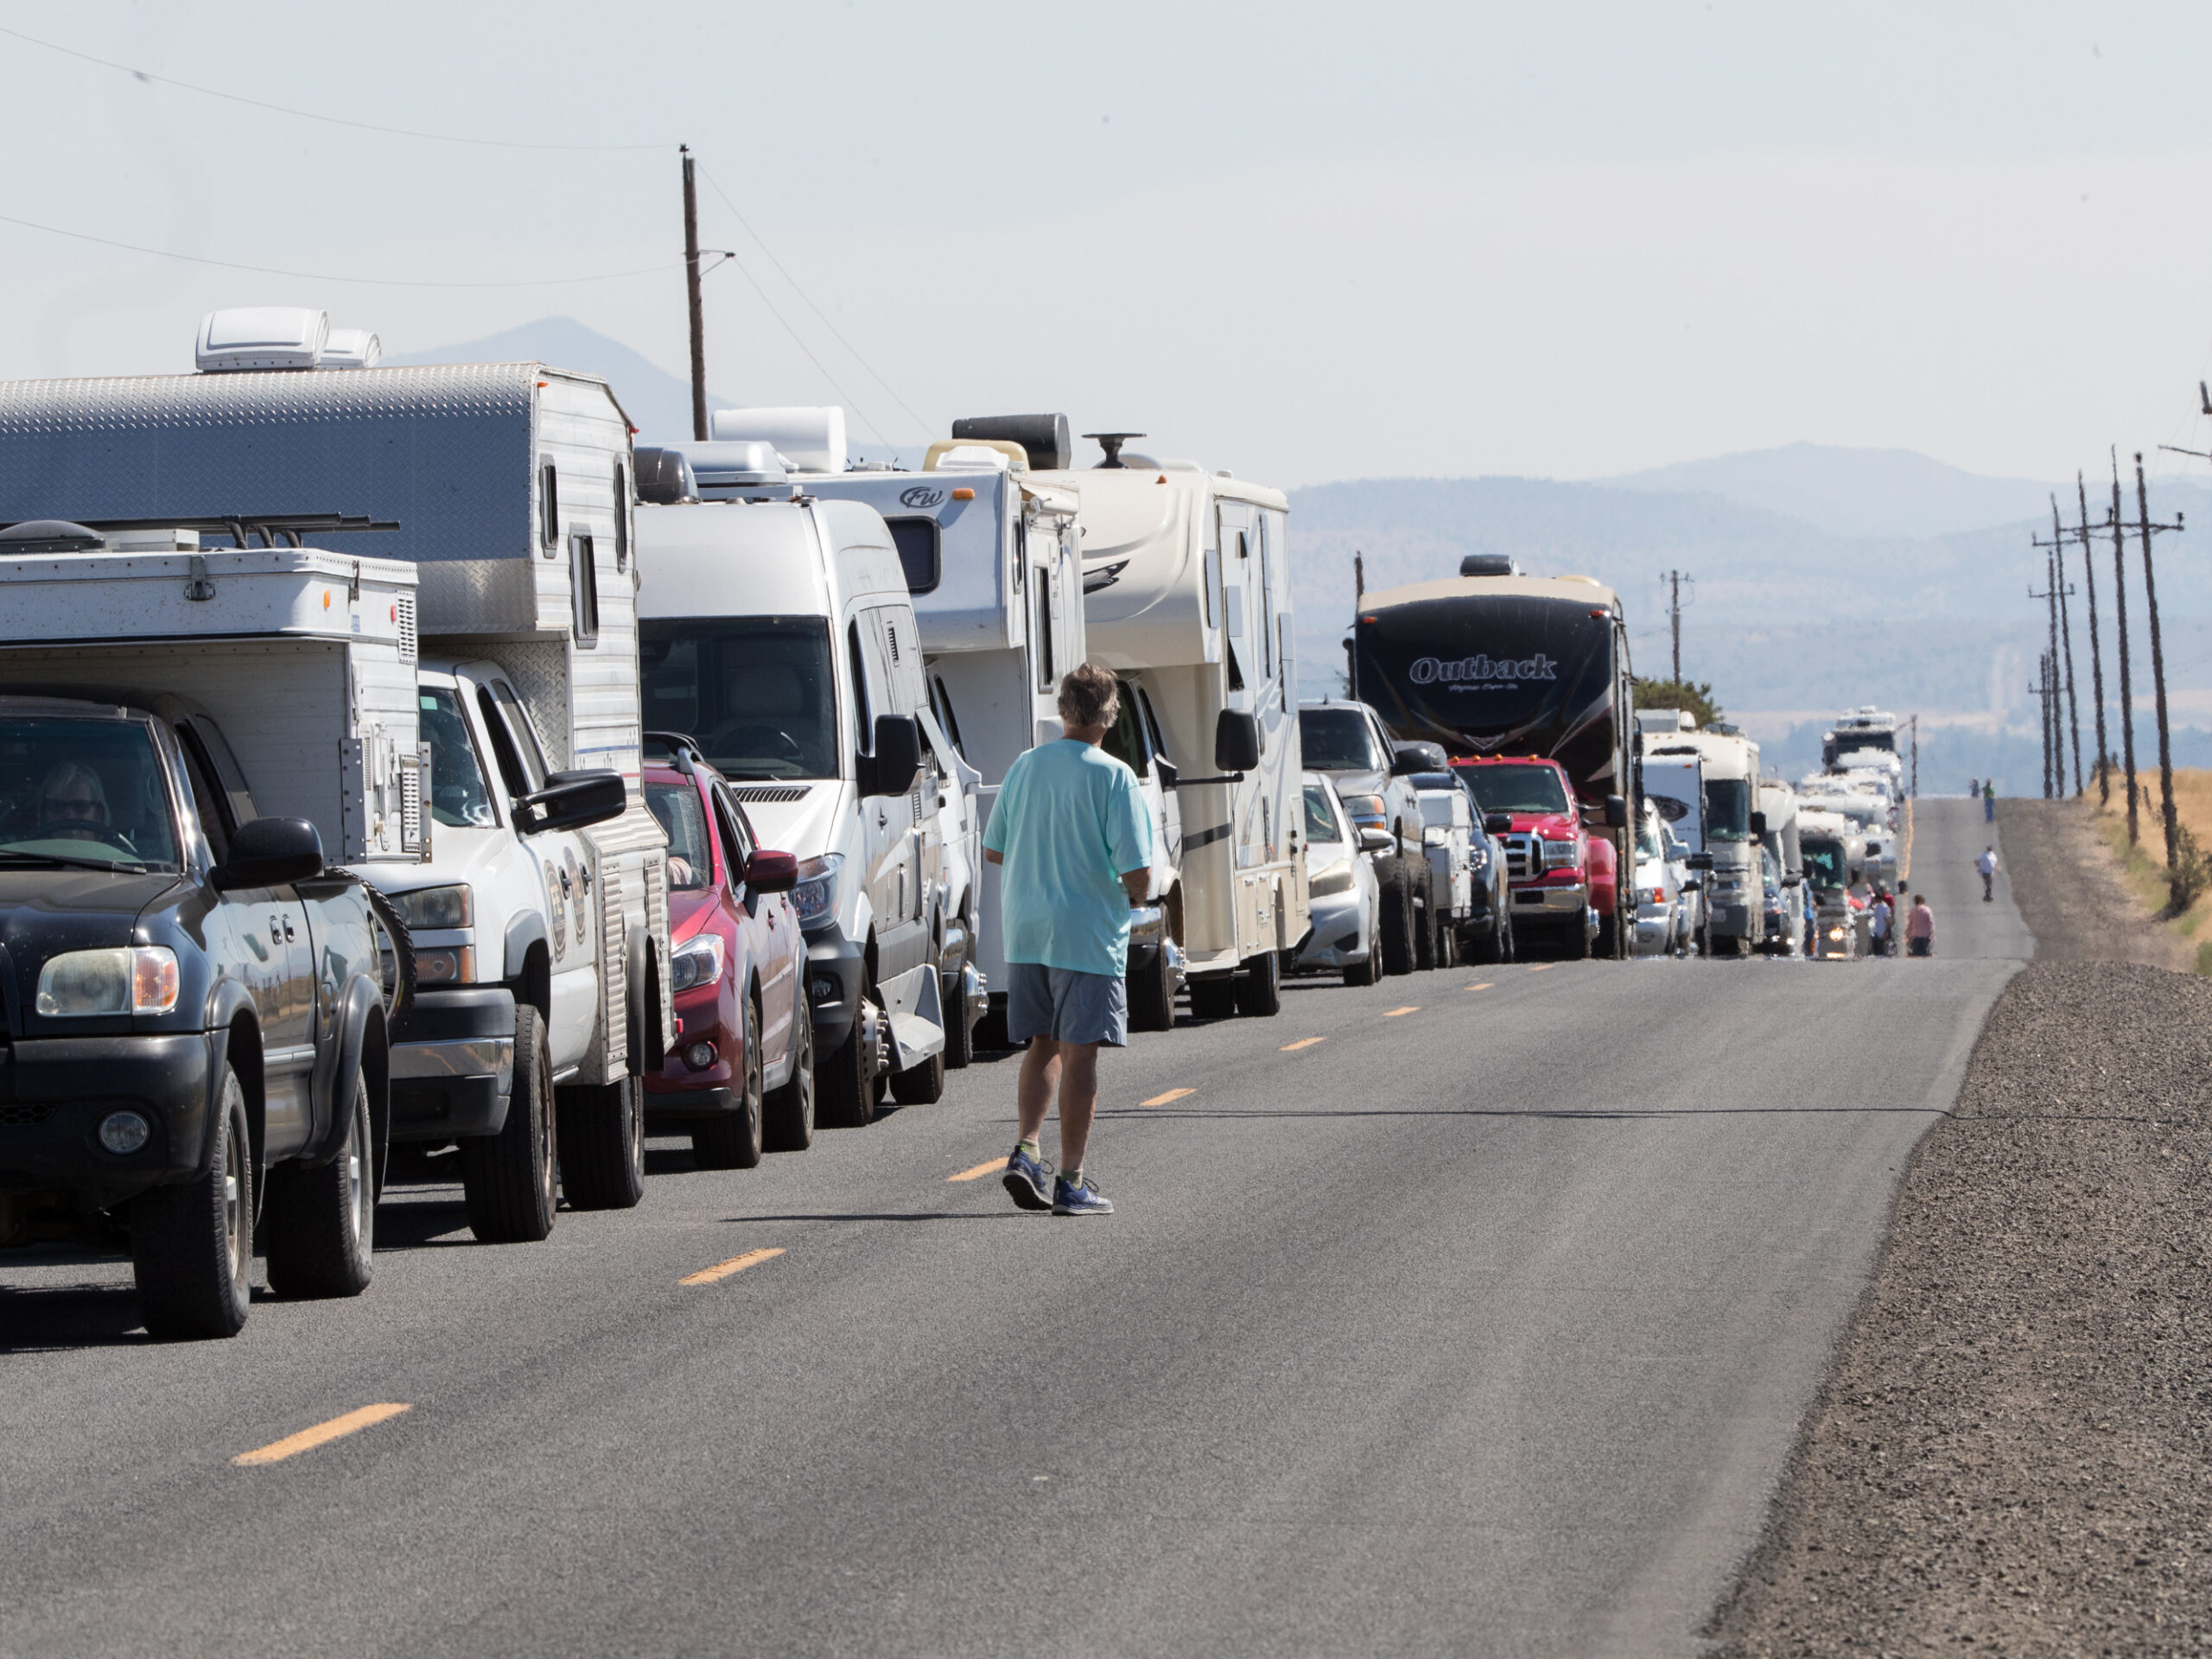 RV traffic sits at a standstill along a two-lane road near Madras, Ore., a few days before the 2017 total solar eclipse. Experts say traffic could be heavy, but eclipse watchers shouldn't necessarily be deterred.